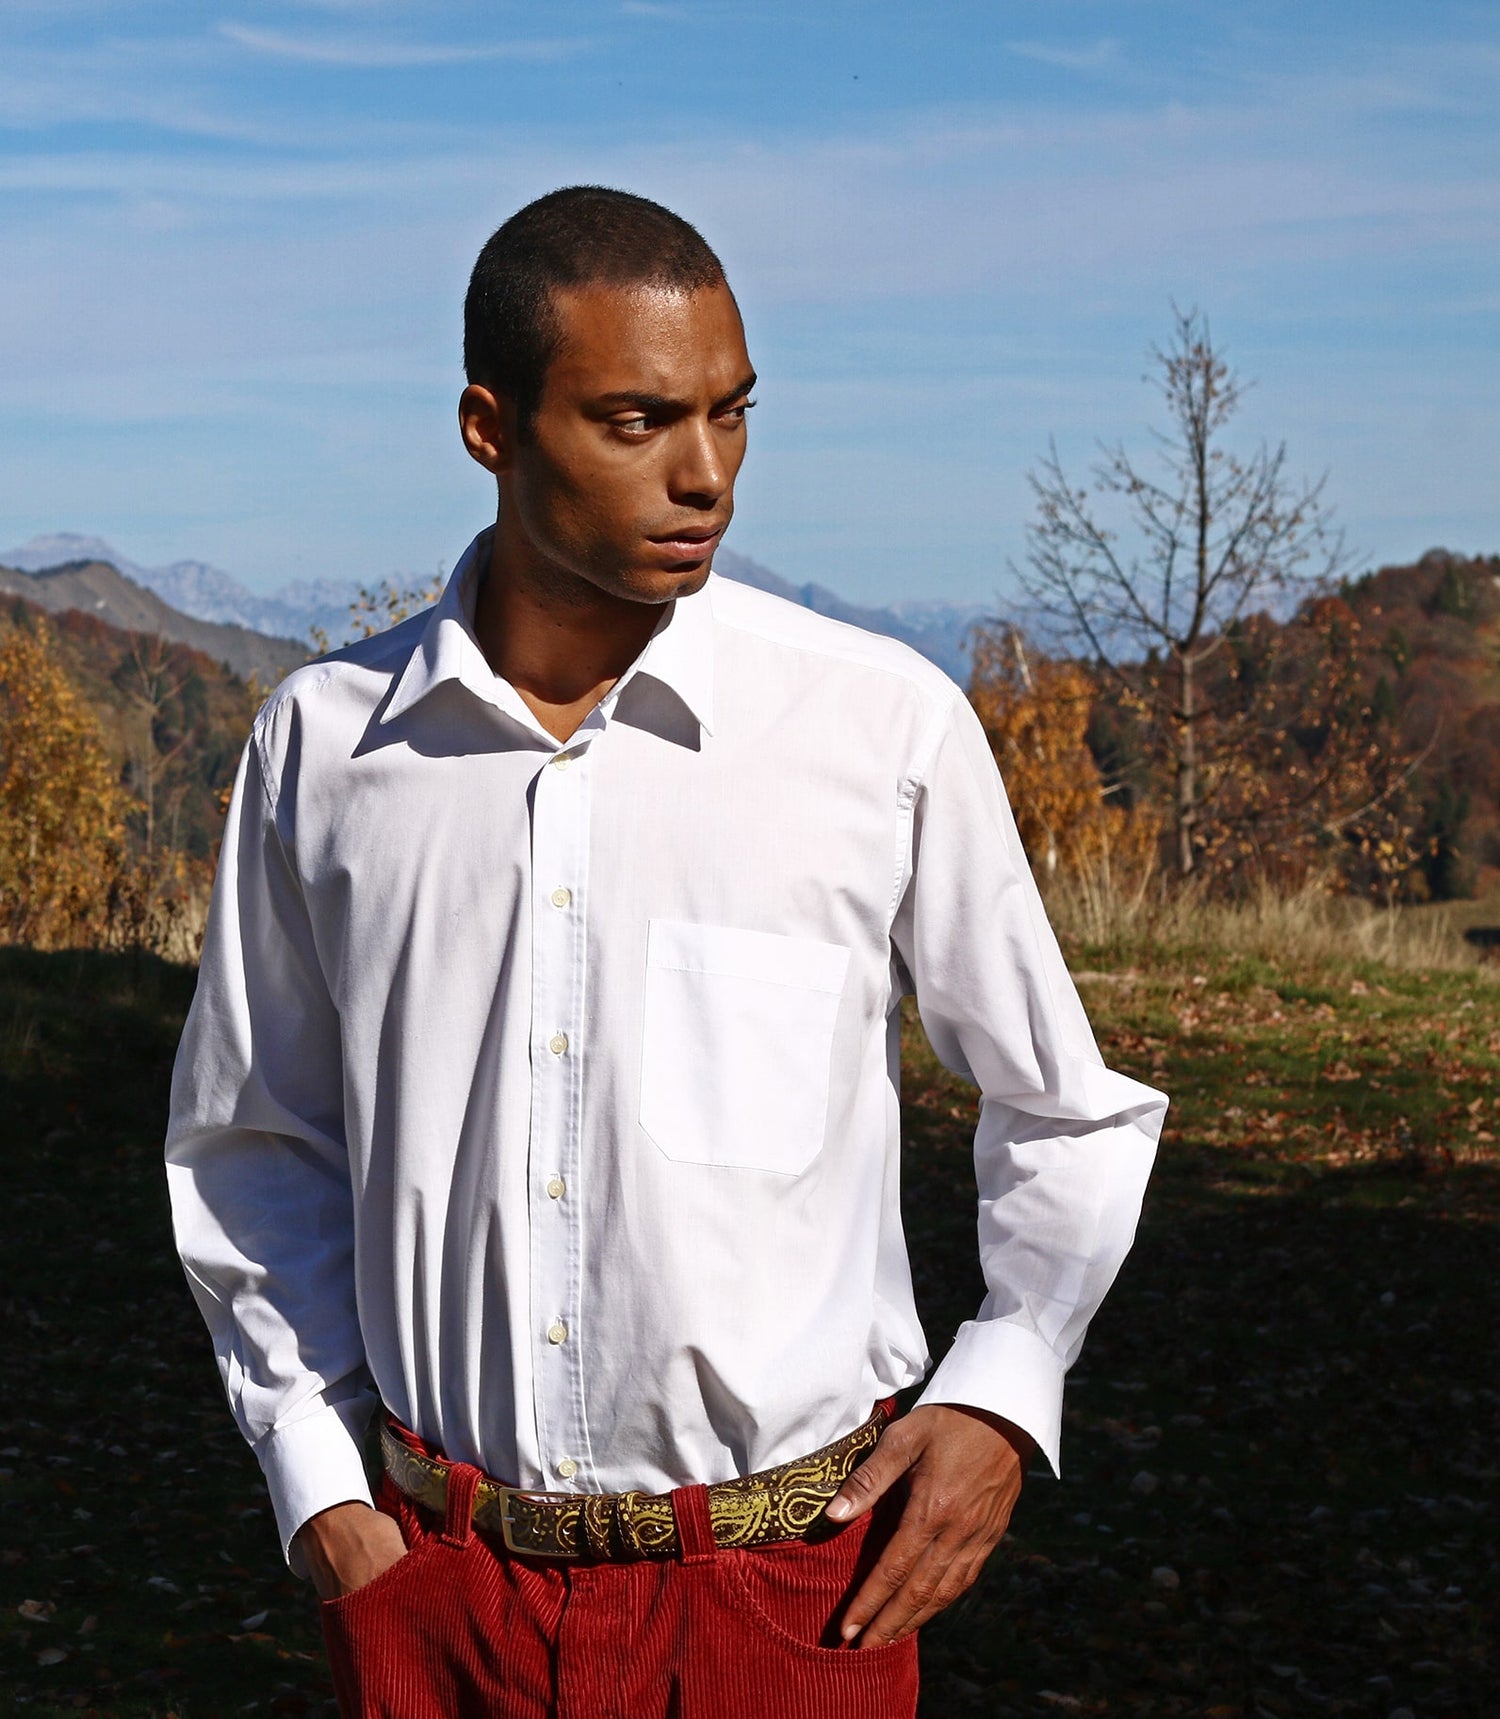 paisely painted belt weared by a guy with red trousers and white shirt, mountains on the background